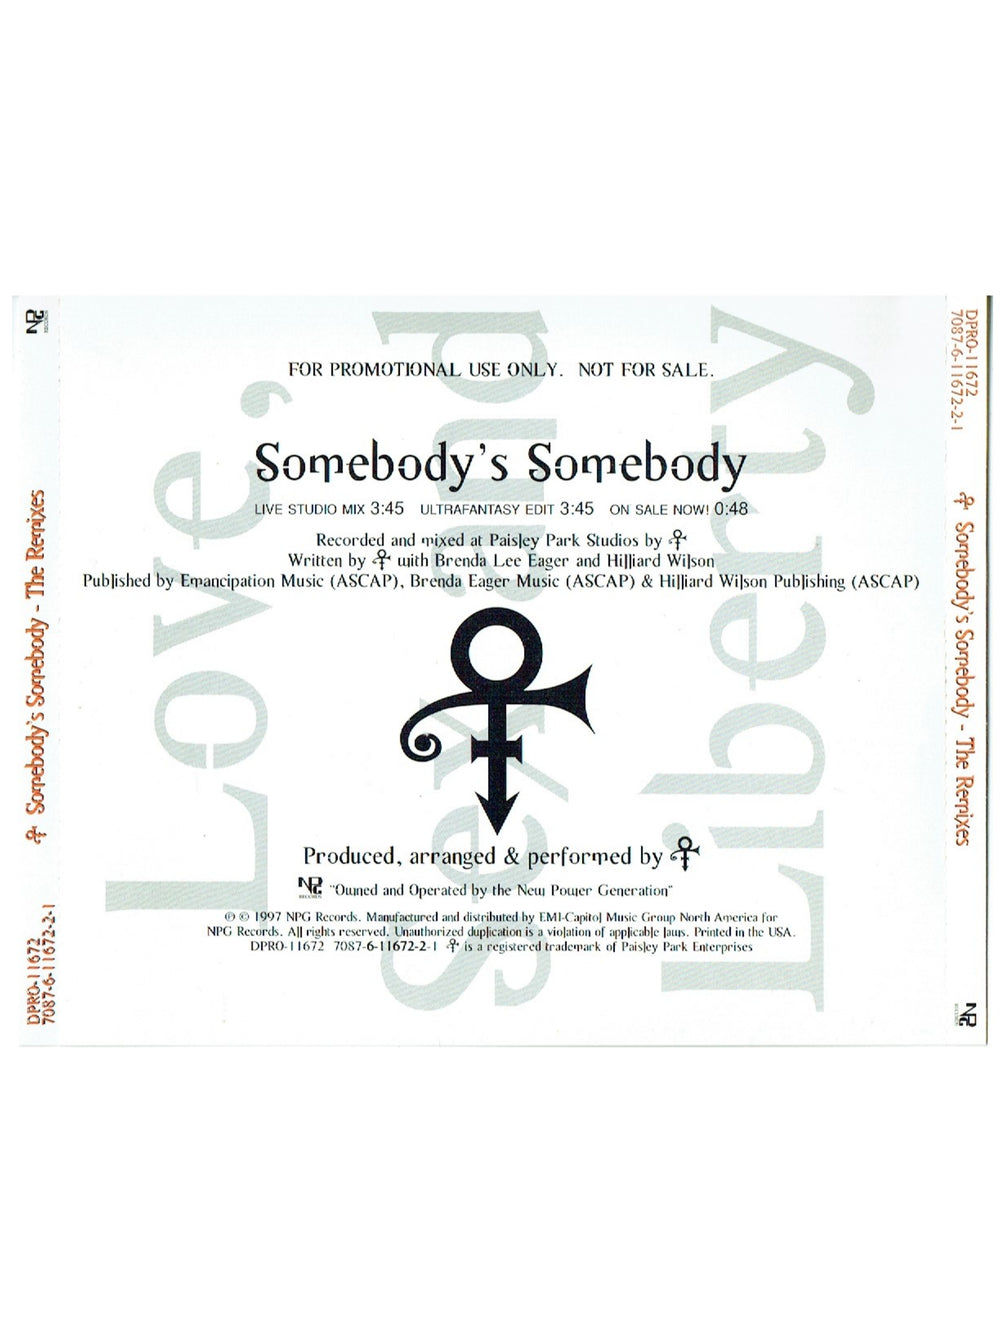 Prince – O(+> Somebody's Somebody Promotional Only CD Single 3 Track USA Release 1997 Prince